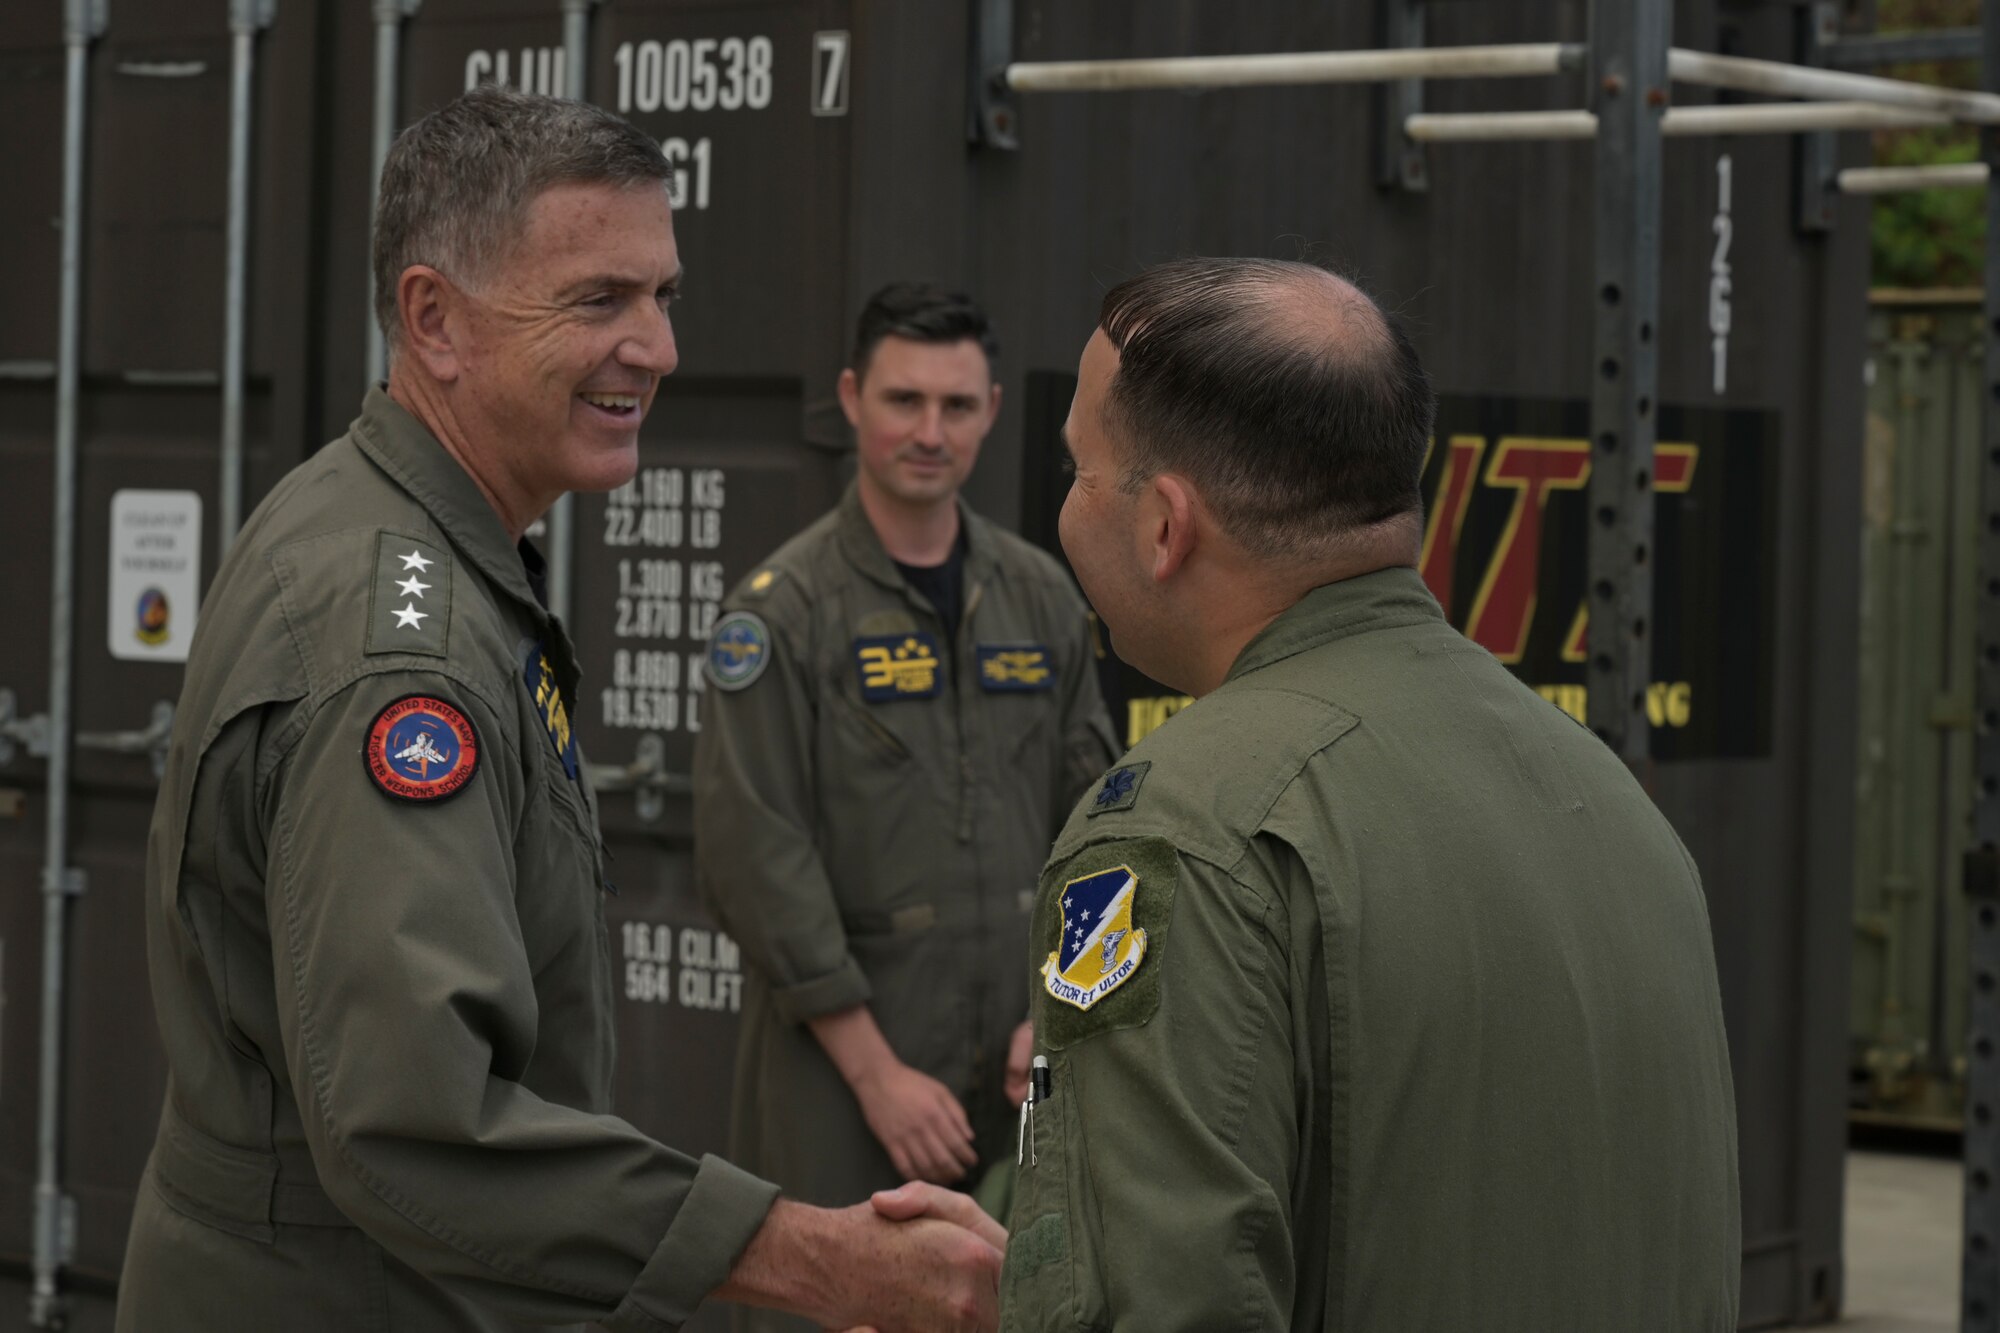 KANEOHE BAY, Hawaii (July 28, 2022) U.S. Navy Vice Adm. Michael E. Boyle, Commander, 3rd Fleet, and U.S. Air Force Lt. Col. Justin Muller, Rim of the Pacific (RIMPAC) 2022 MQ-9 detachment mission commander, shake hands as Boyle departs the MQ-9 operations center during RIMPAC, July 29, at Marine Corps Air Station Kaneohe Bay, Hawaii.